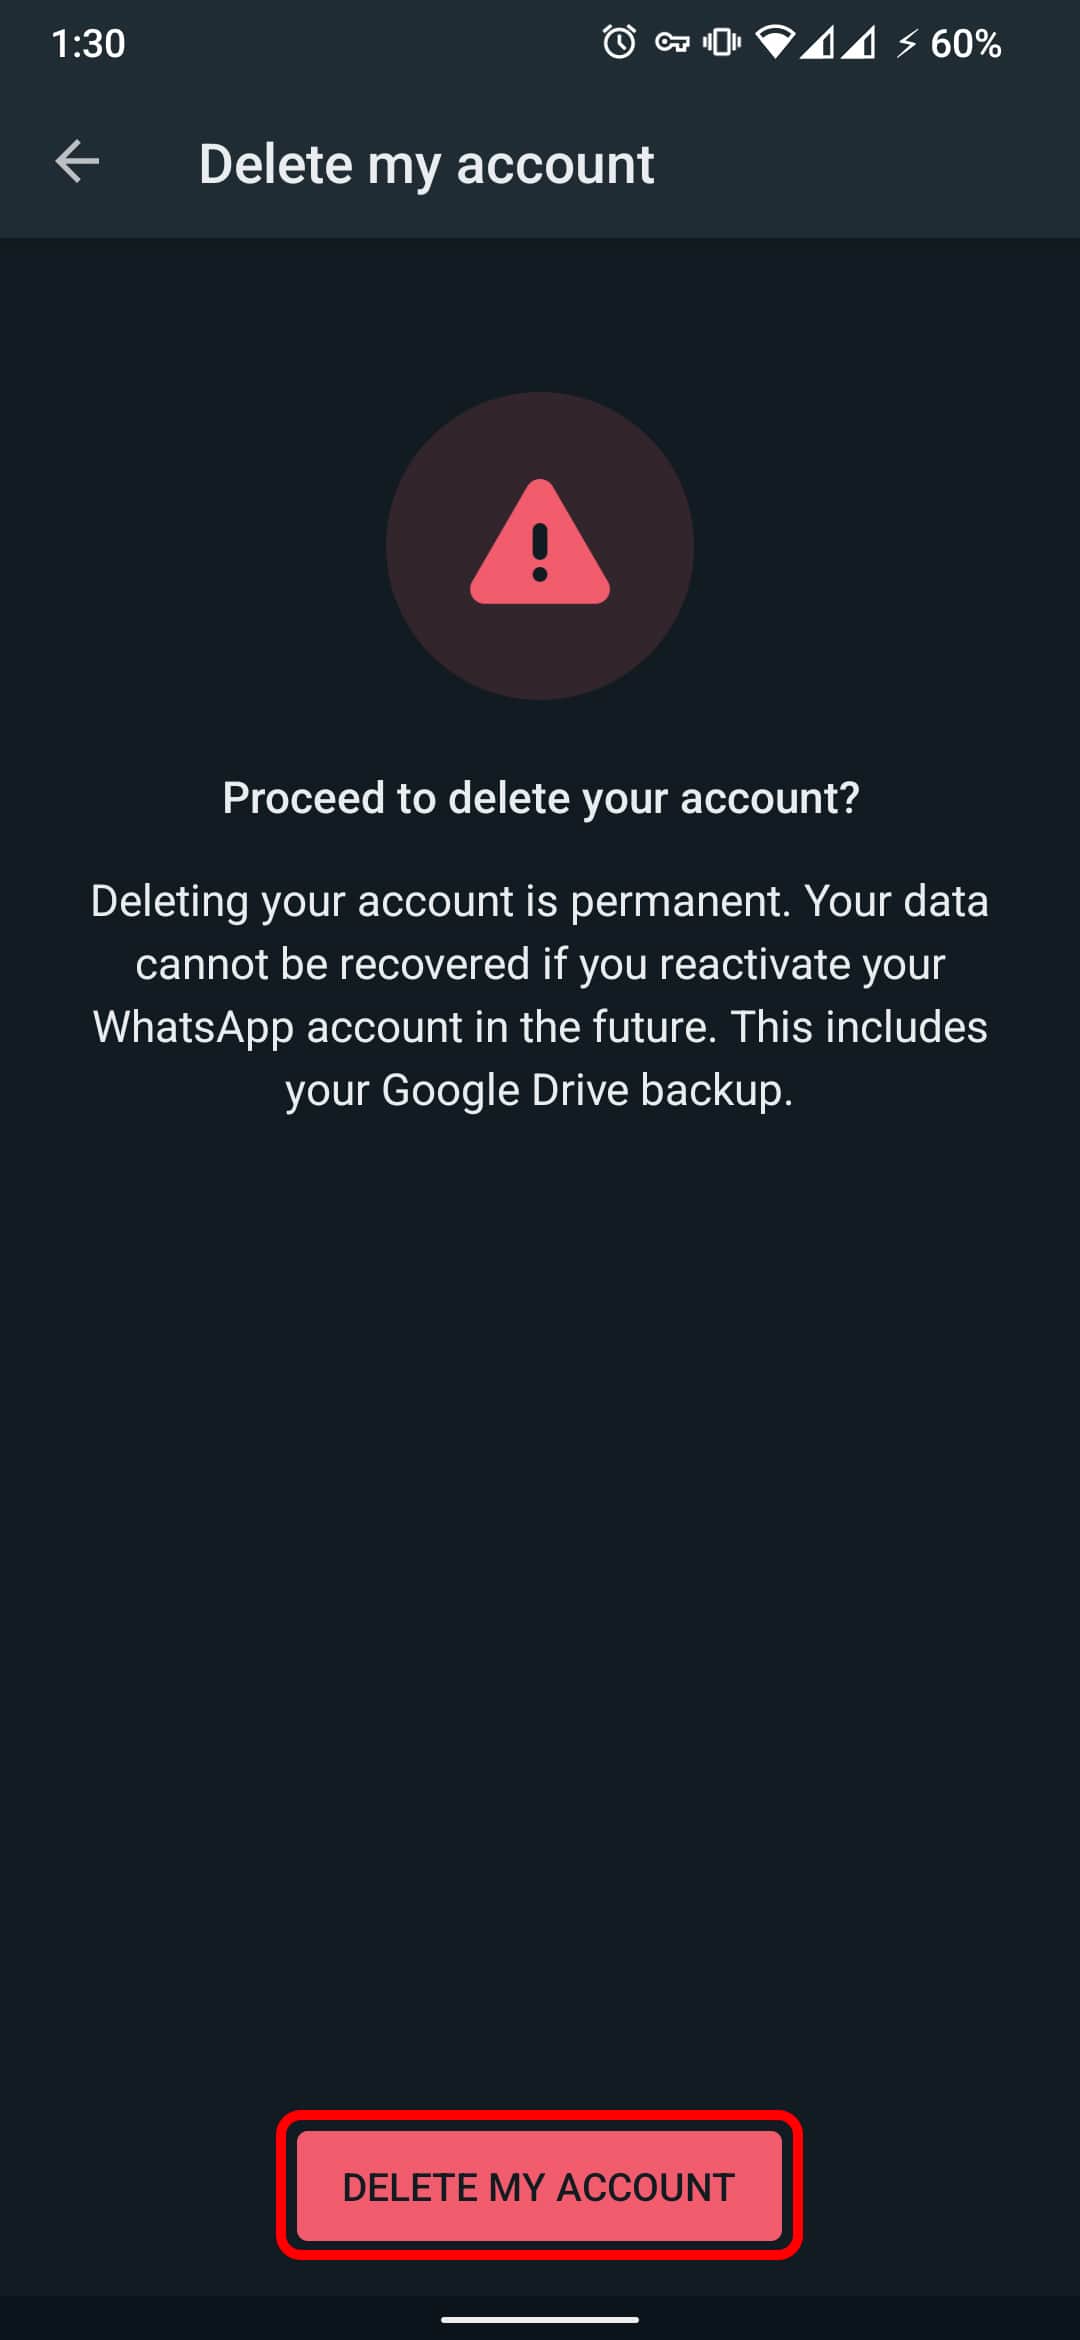 The seventh step of deleting WhatsApp account on Android